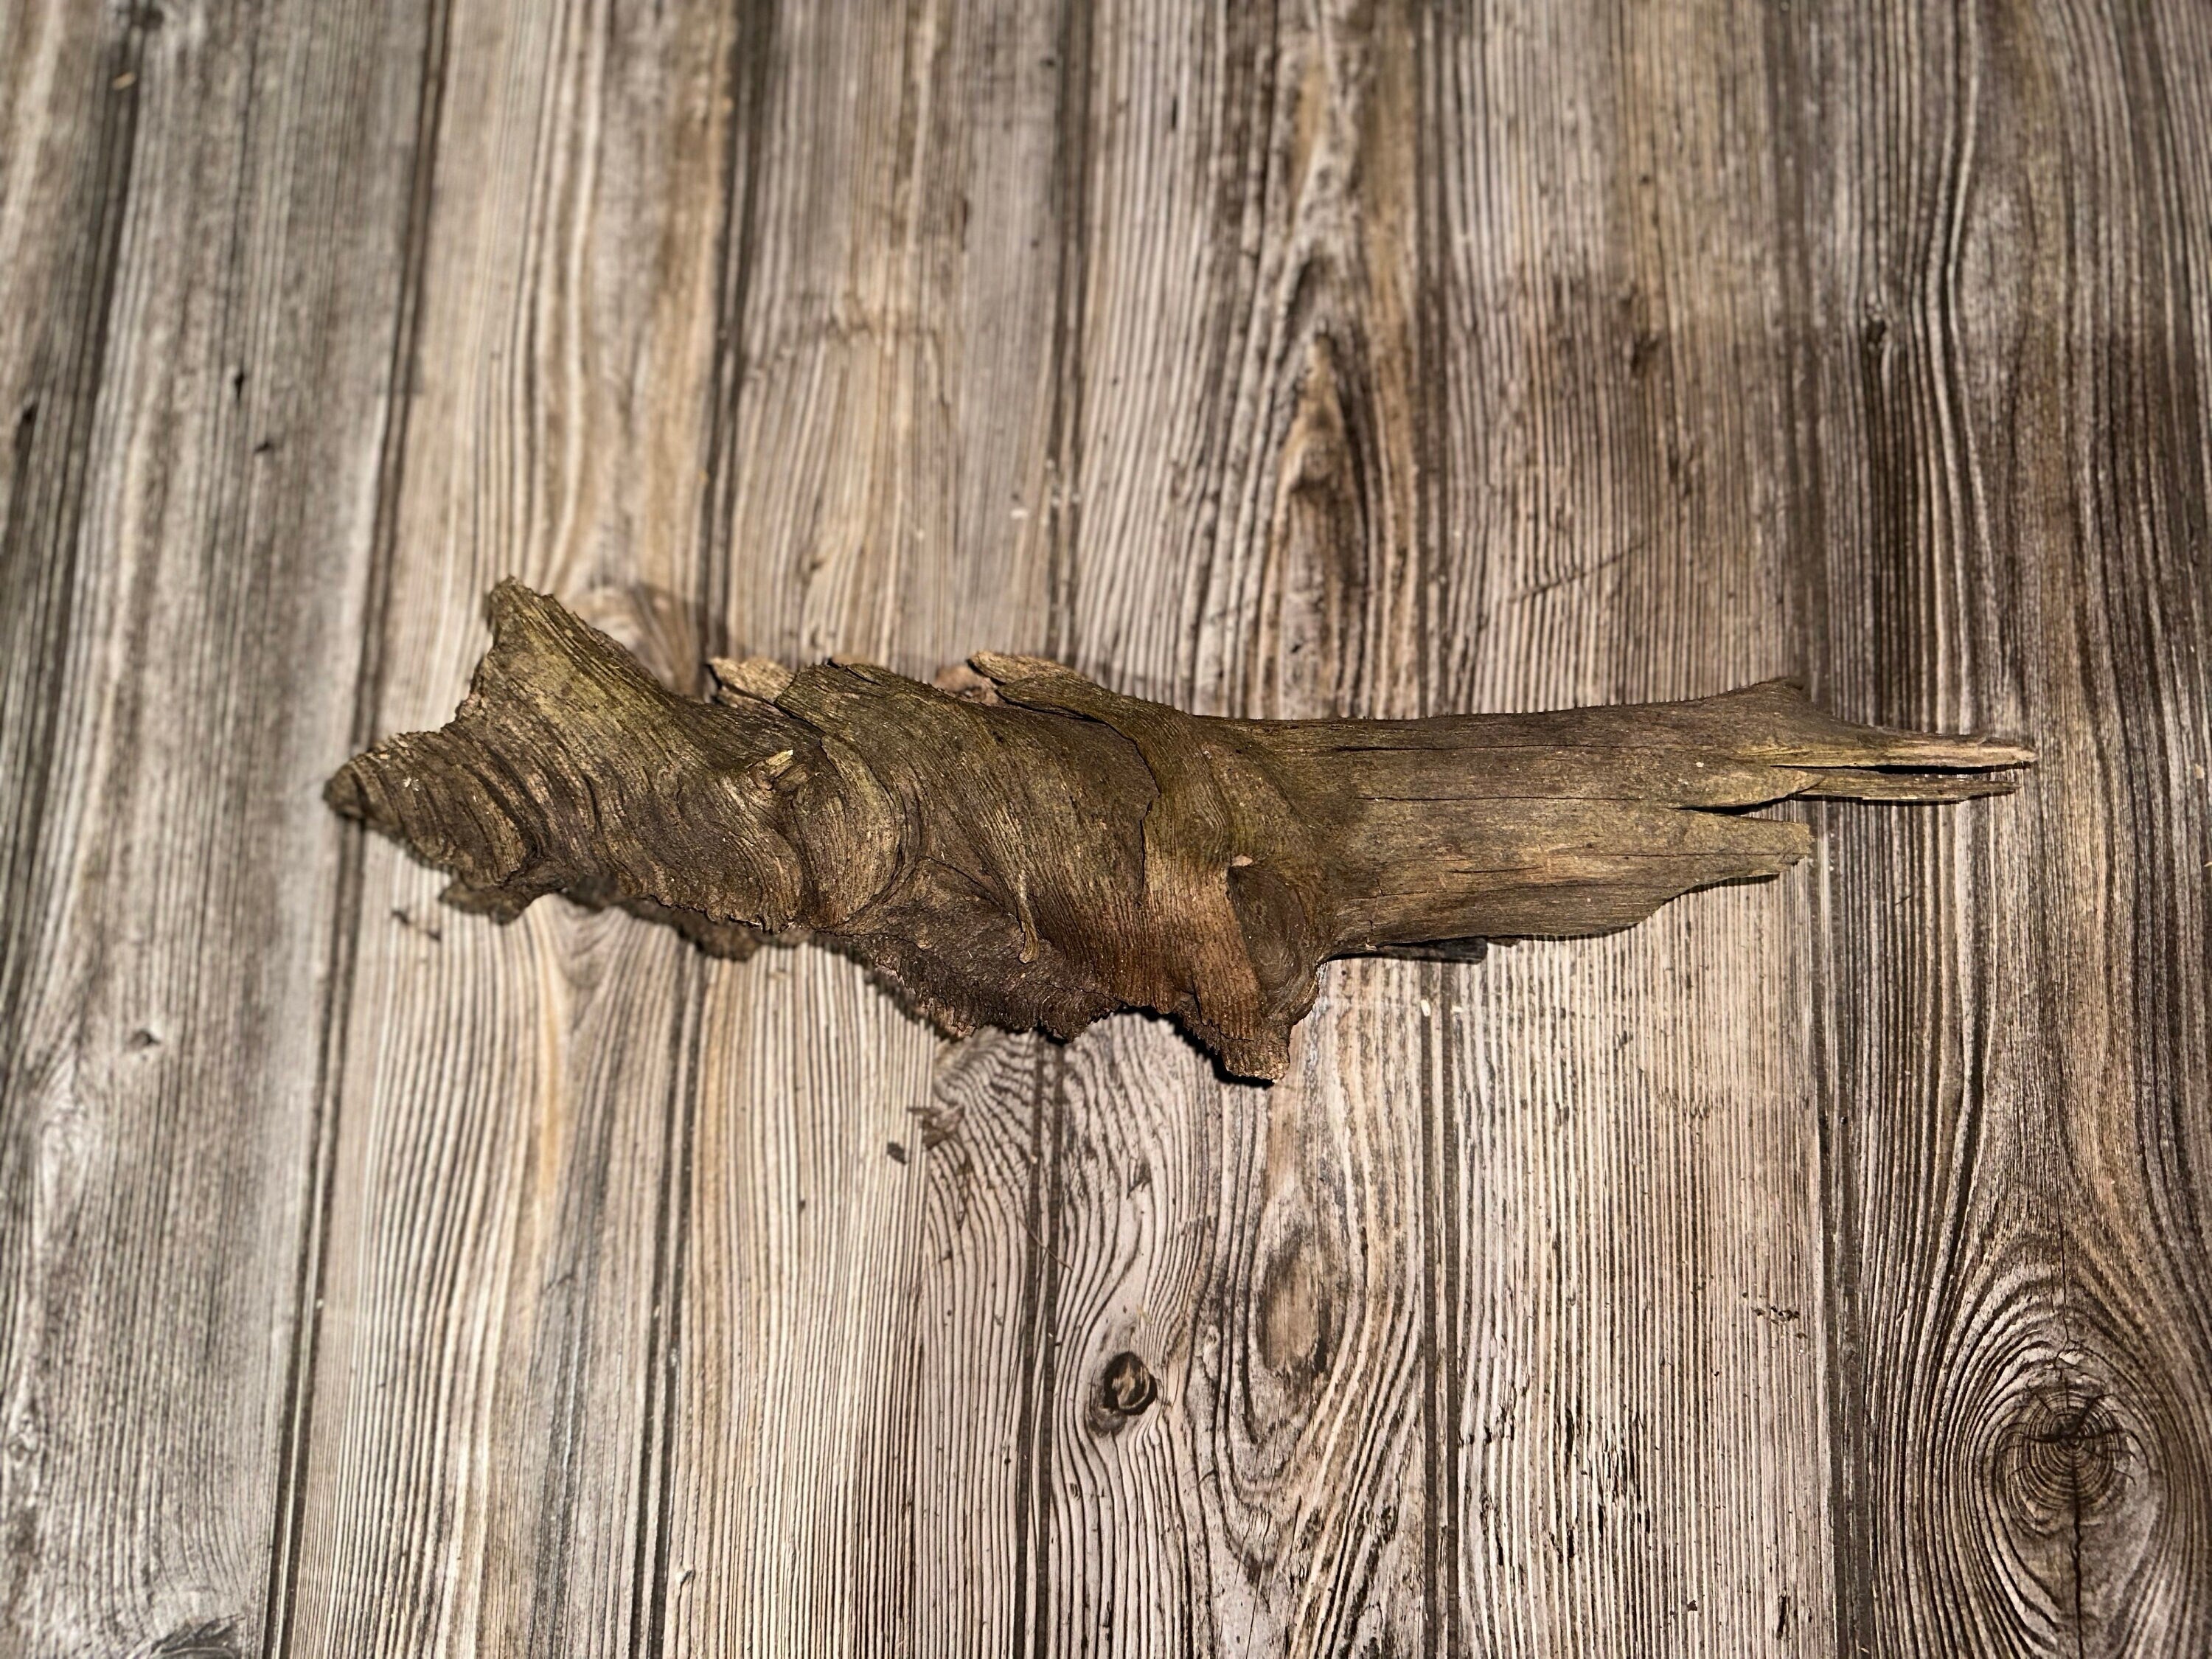 Wood Spearhead, Spearhead Shaped Driftwood, Bark, 16.5 Inches Long by 3.5 Inches Wide and 2.5 Inches High